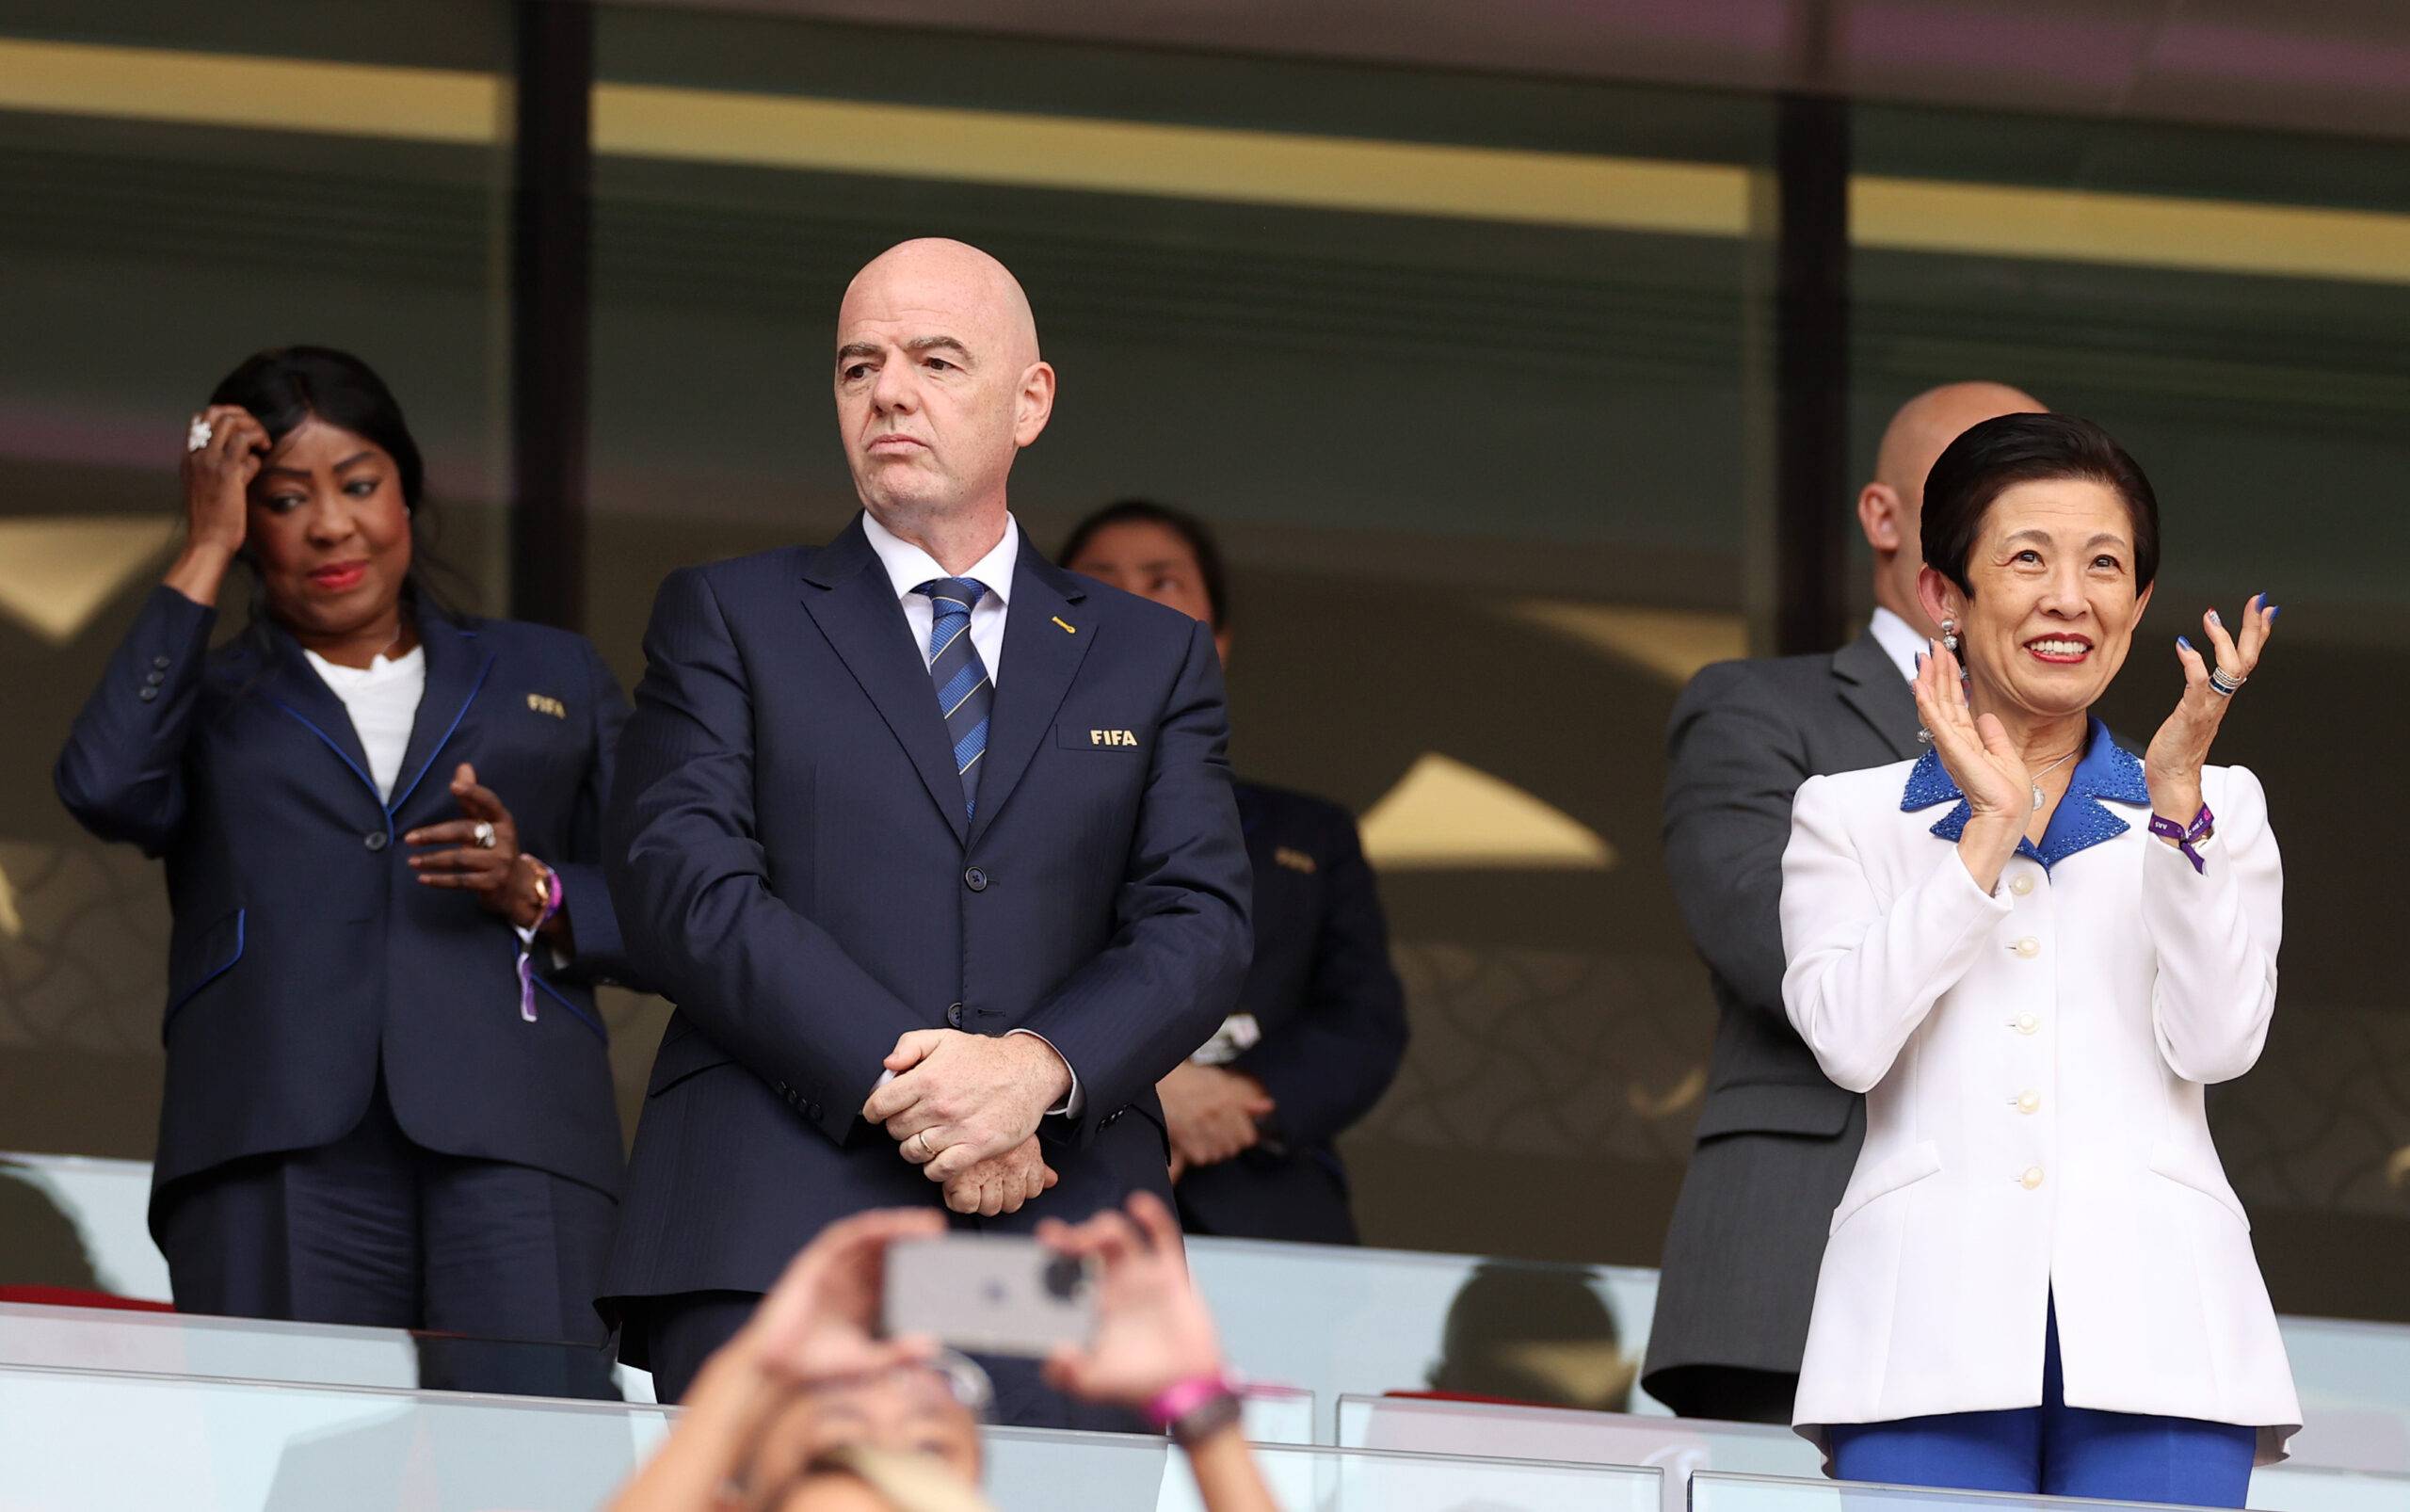 Infantino at the 2022 World Cup